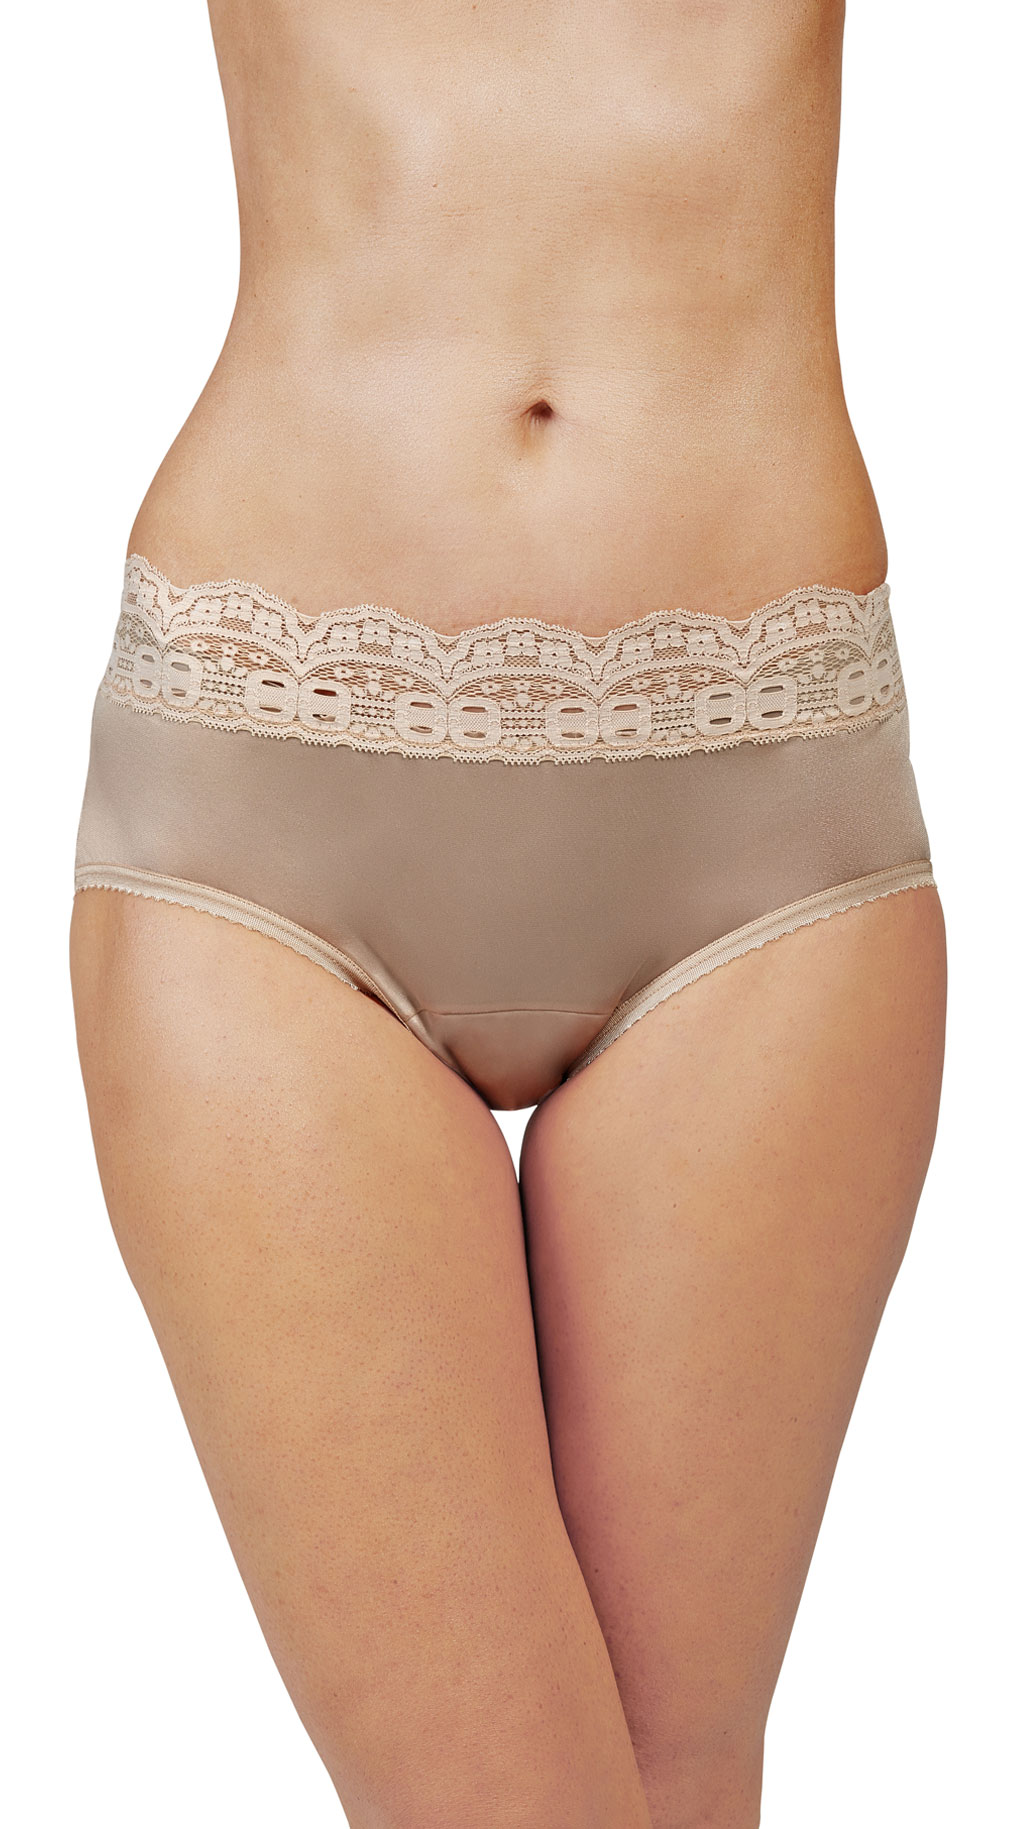 Panty Style Guide: How to Choose the Best Panty for You - Shadowline &  Velrose